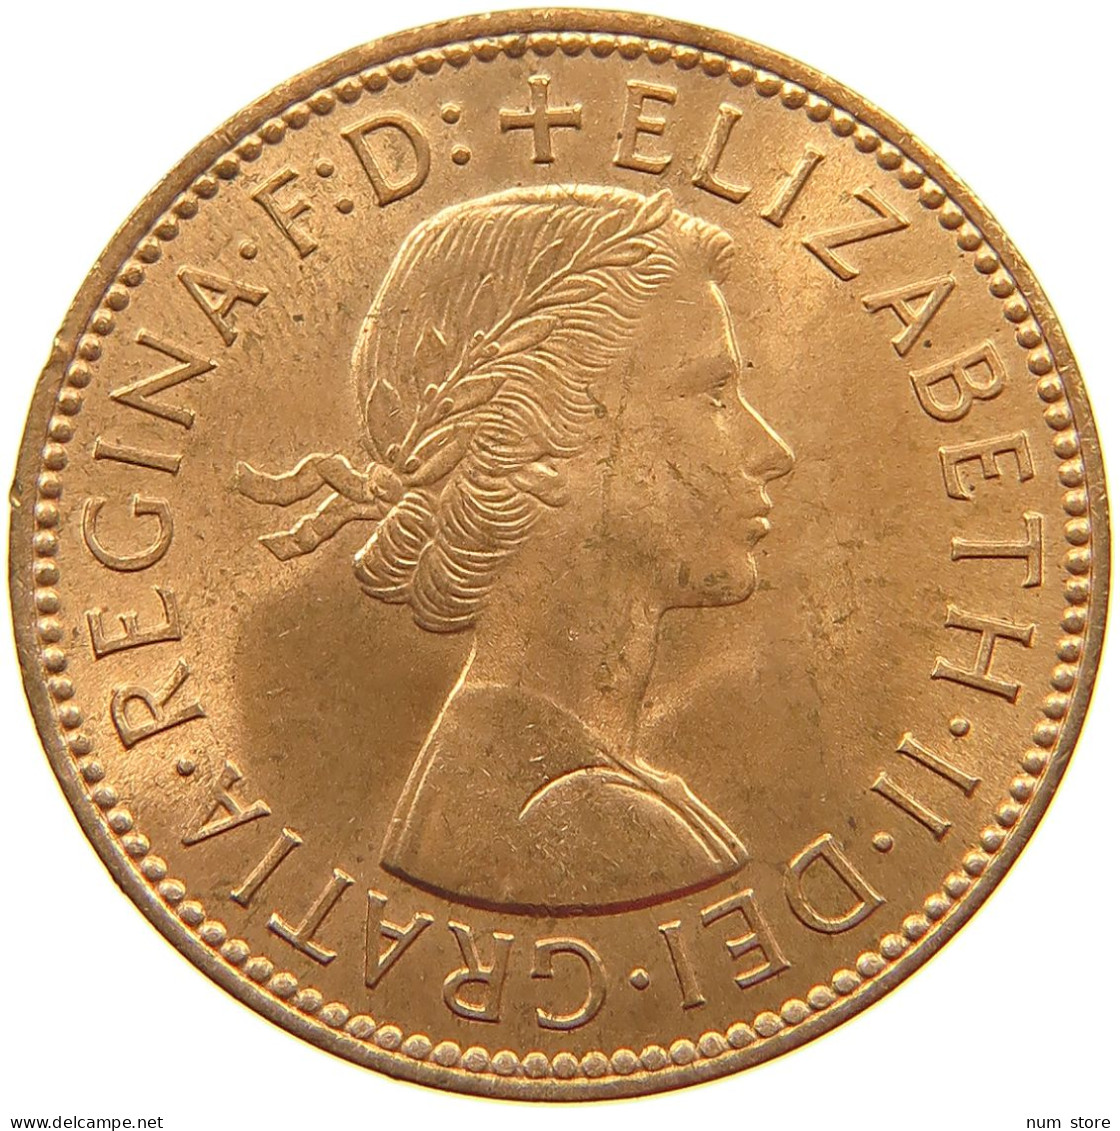 GREAT BRITAIN HALFPENNY 1963 TOP #a039 0363 - C. 1/2 Penny